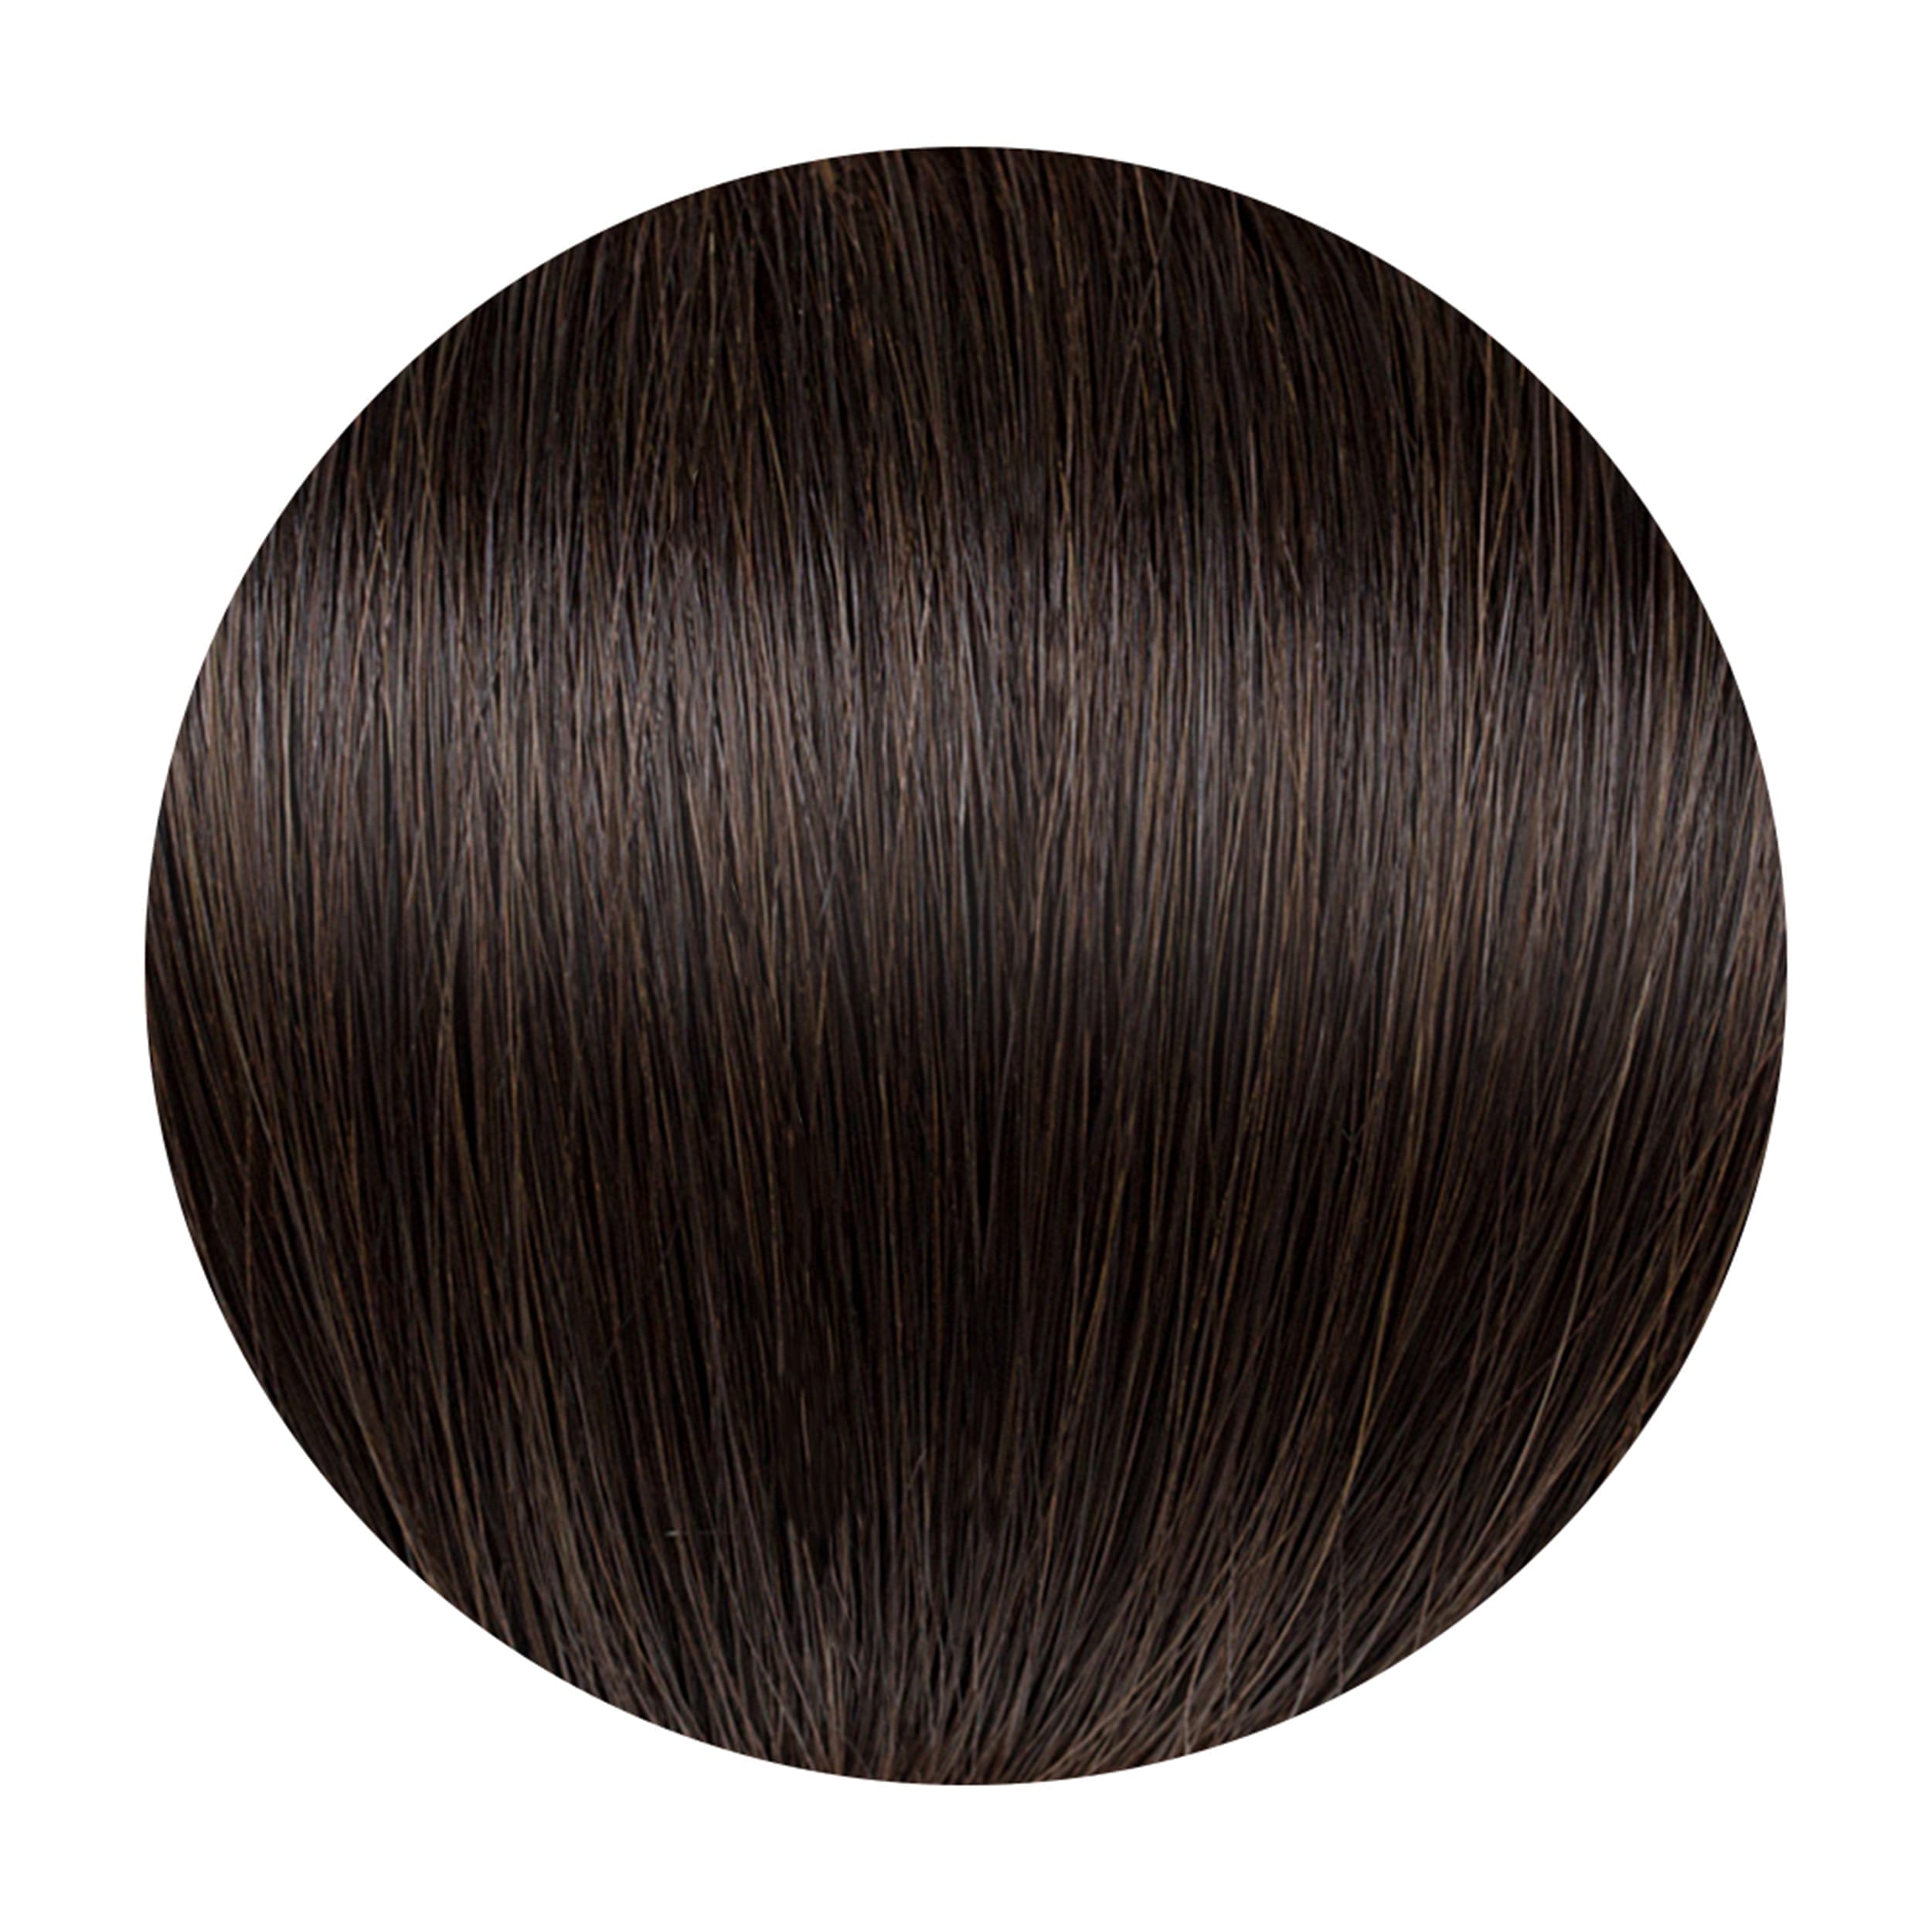 Ritzy Human Hair Extensions Clip in 1 Piece